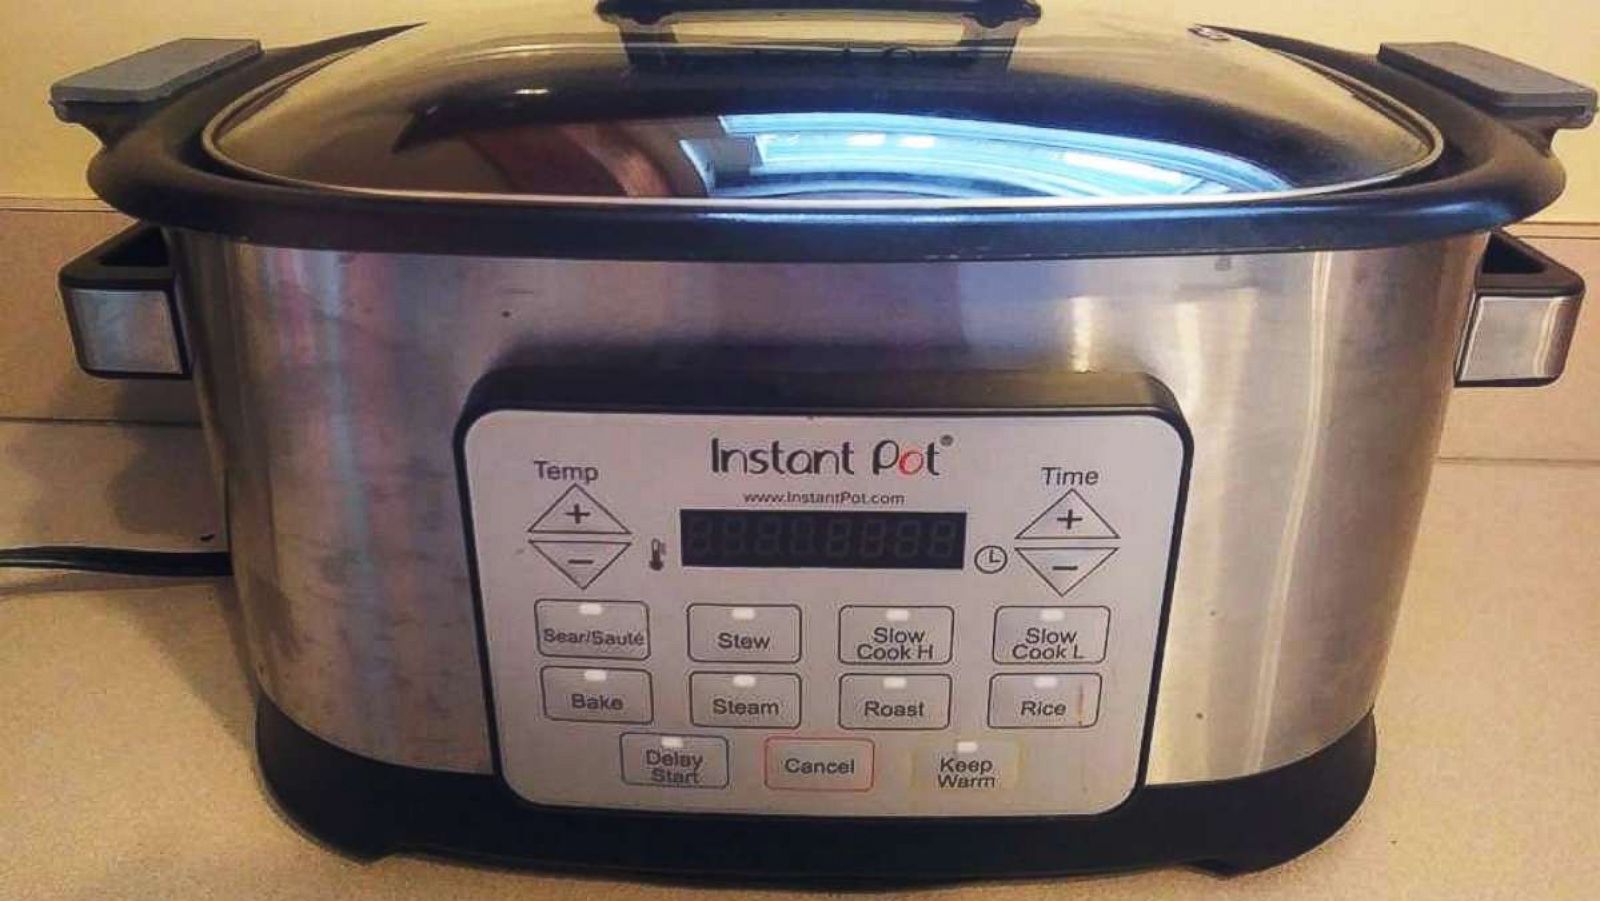 Today only: Get the Instant Pot Aura slow cooker for 46% off on